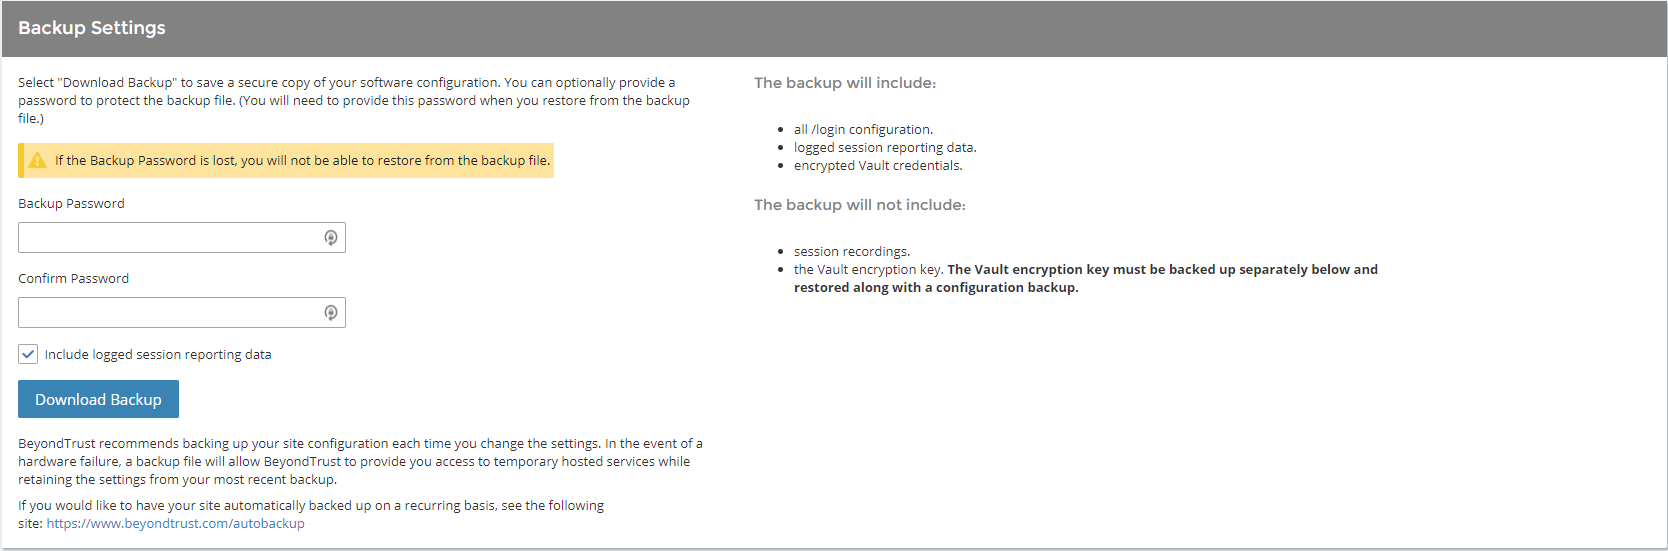 Image of the Backup Settings section in /login